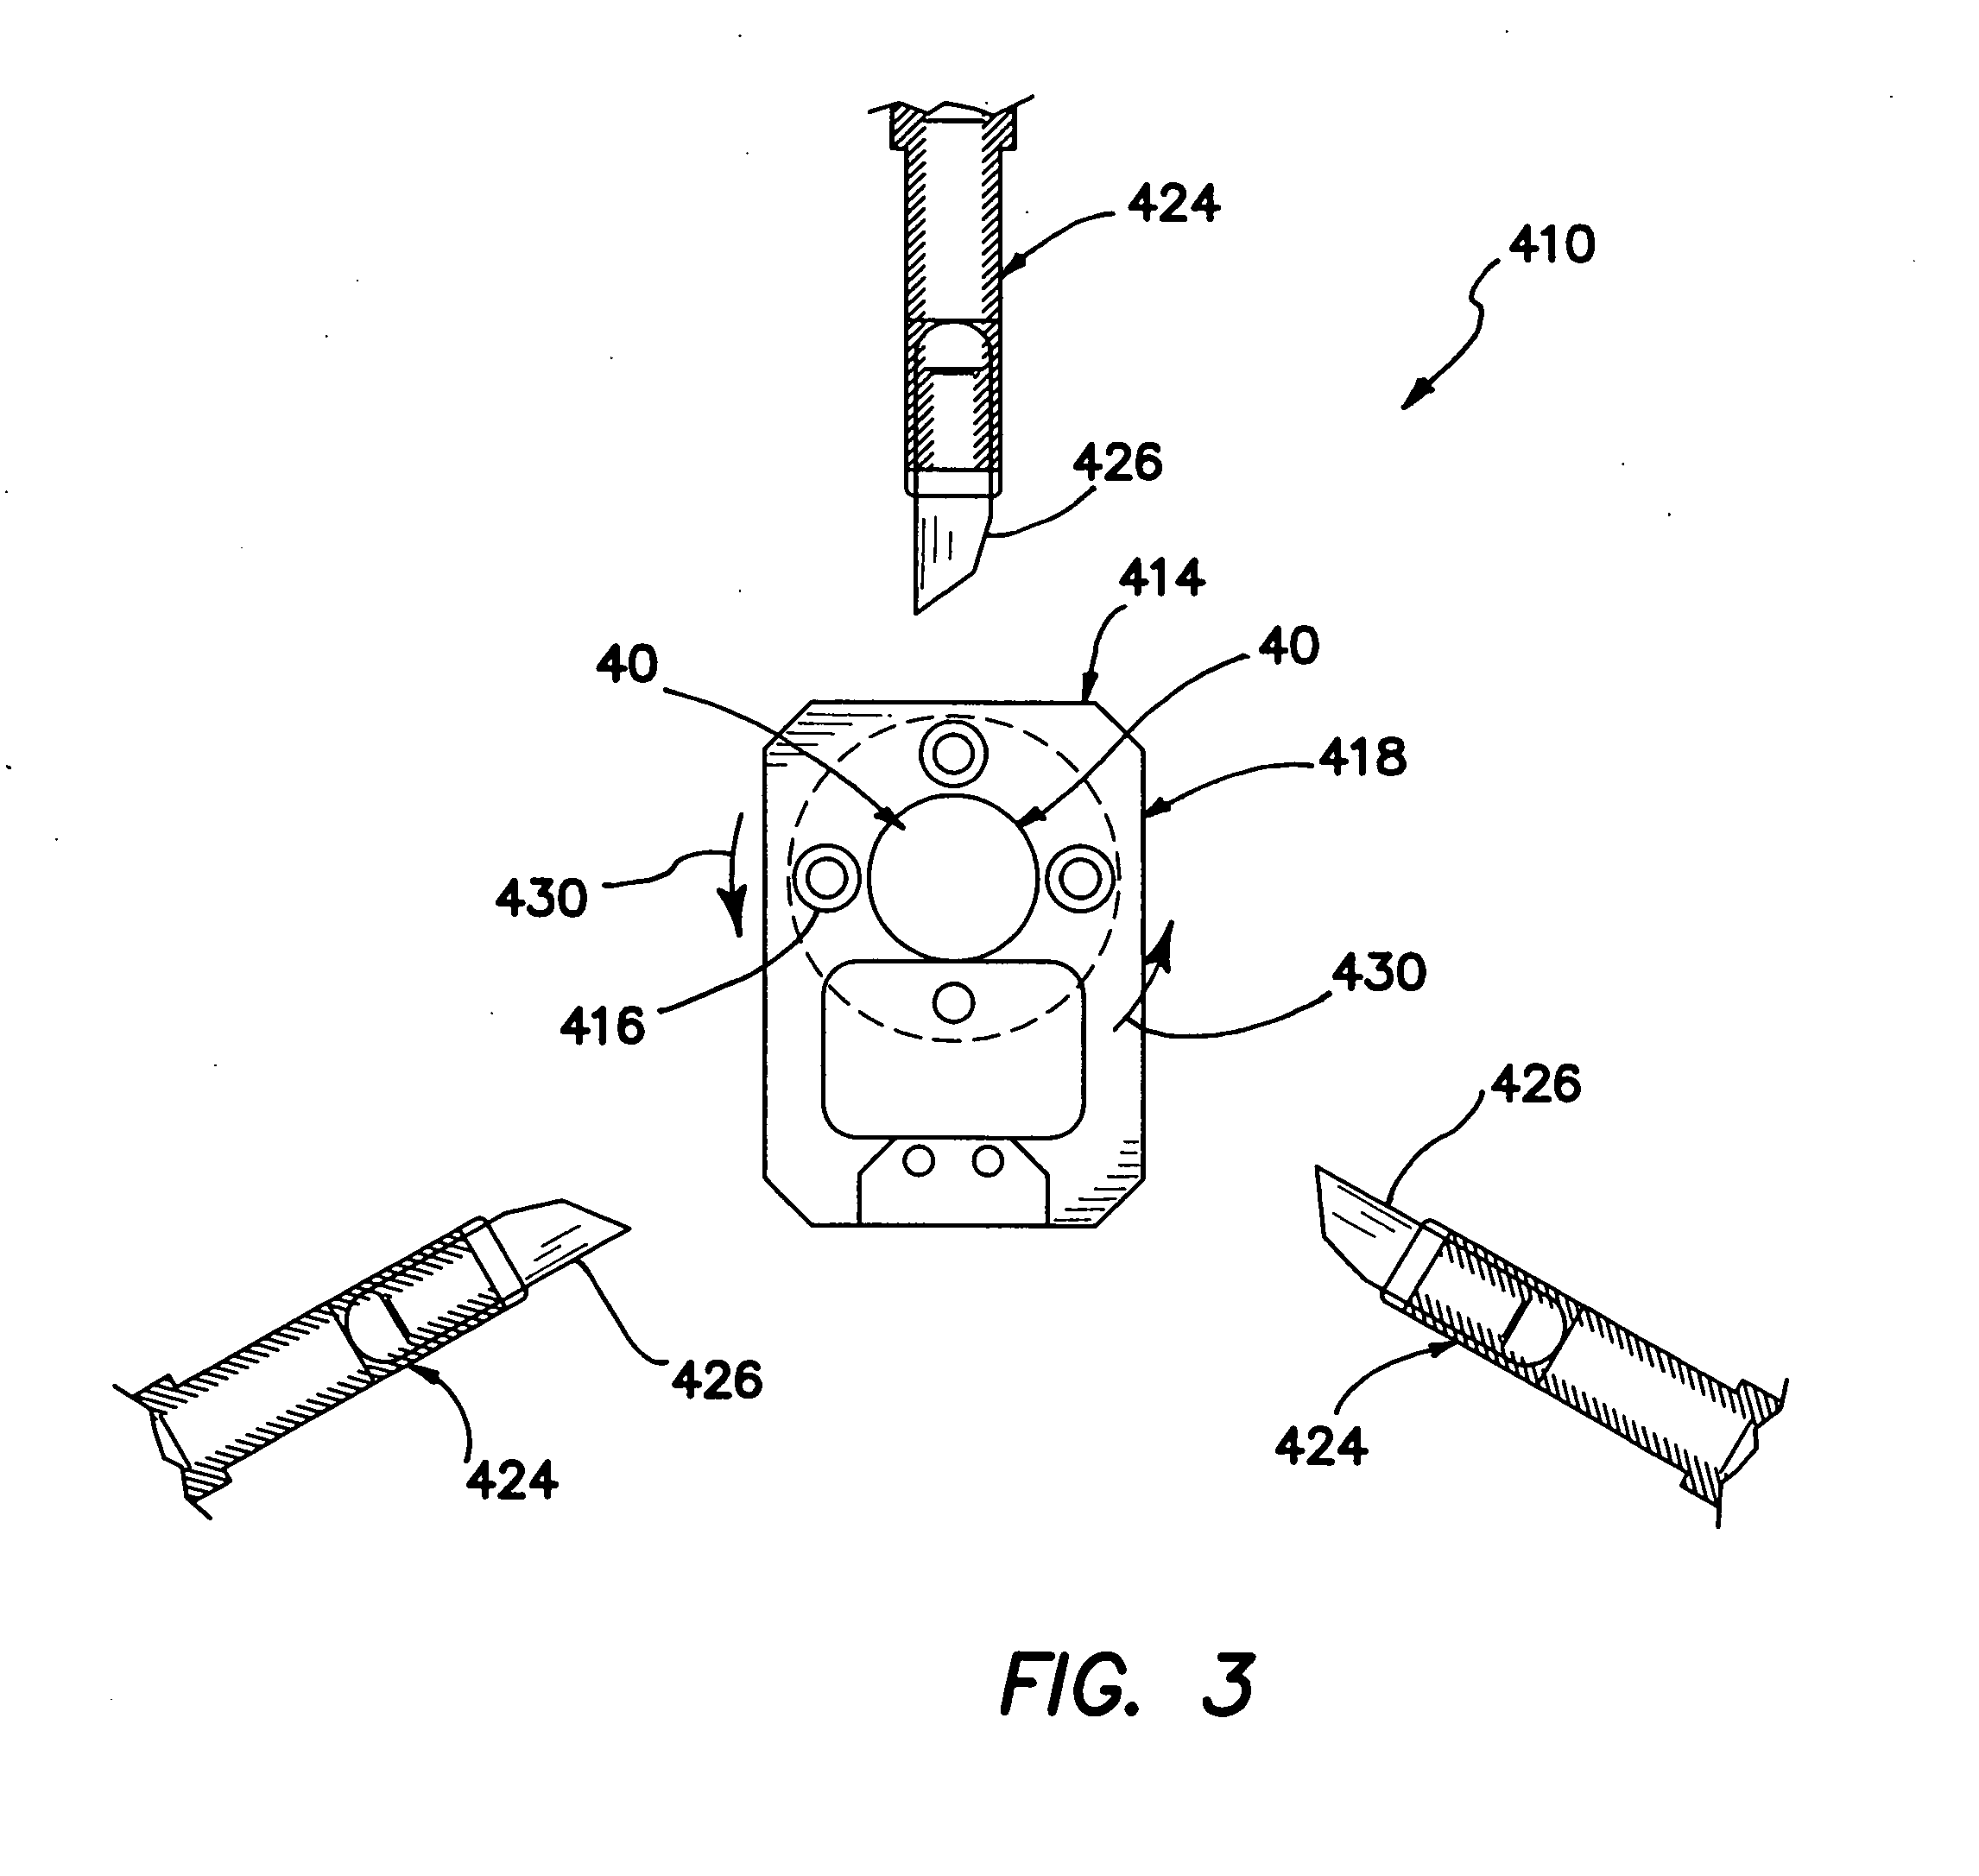 Systems and methods for removing lenses from lens molds